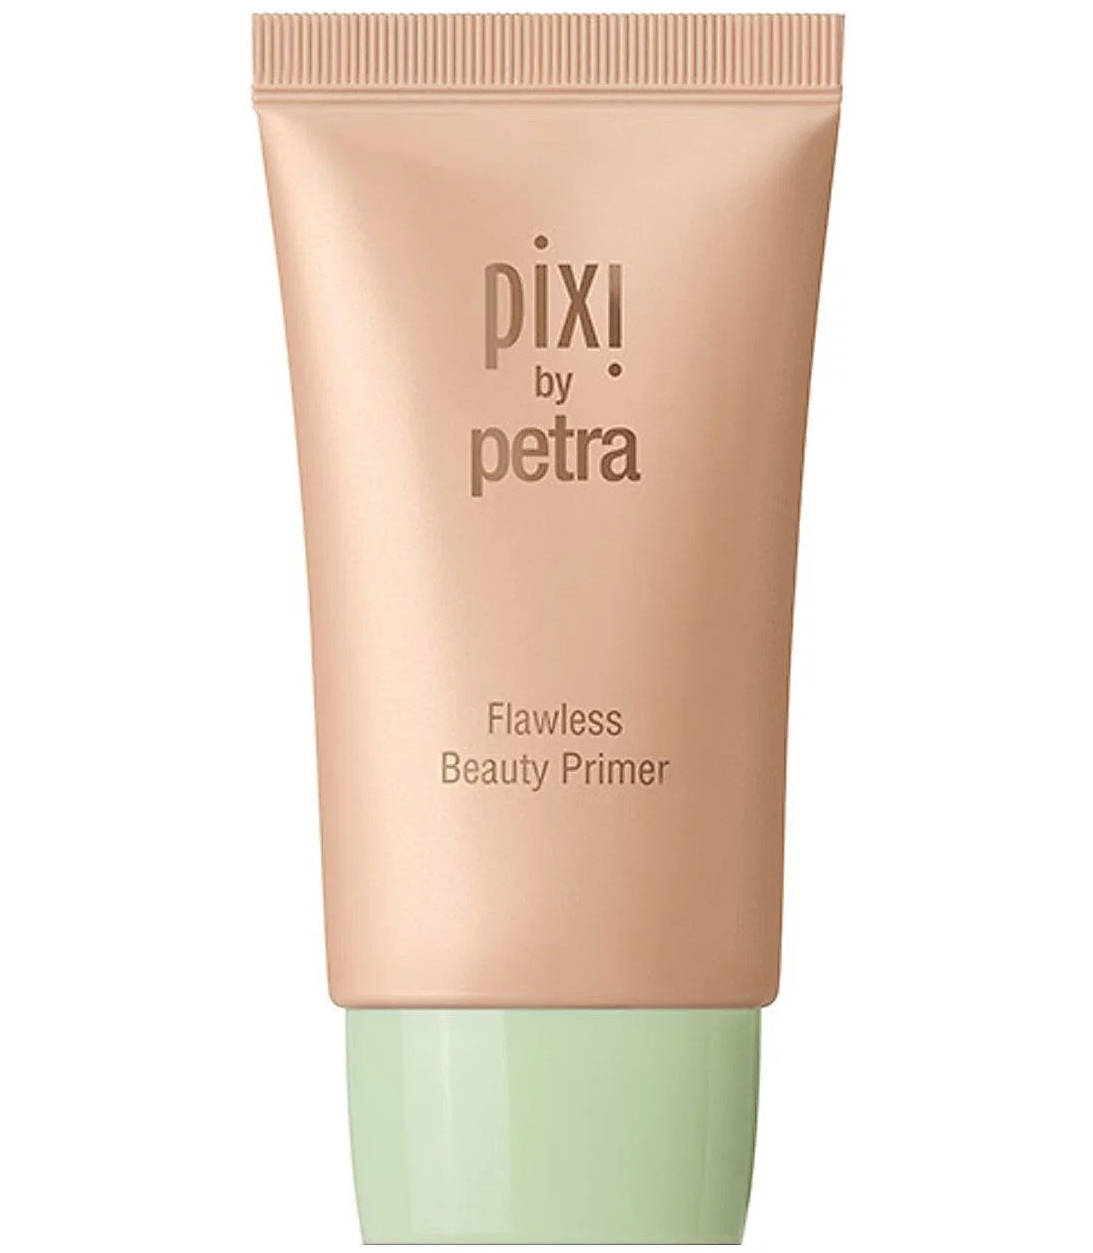 Pixi Flawless Beauty Primer Review